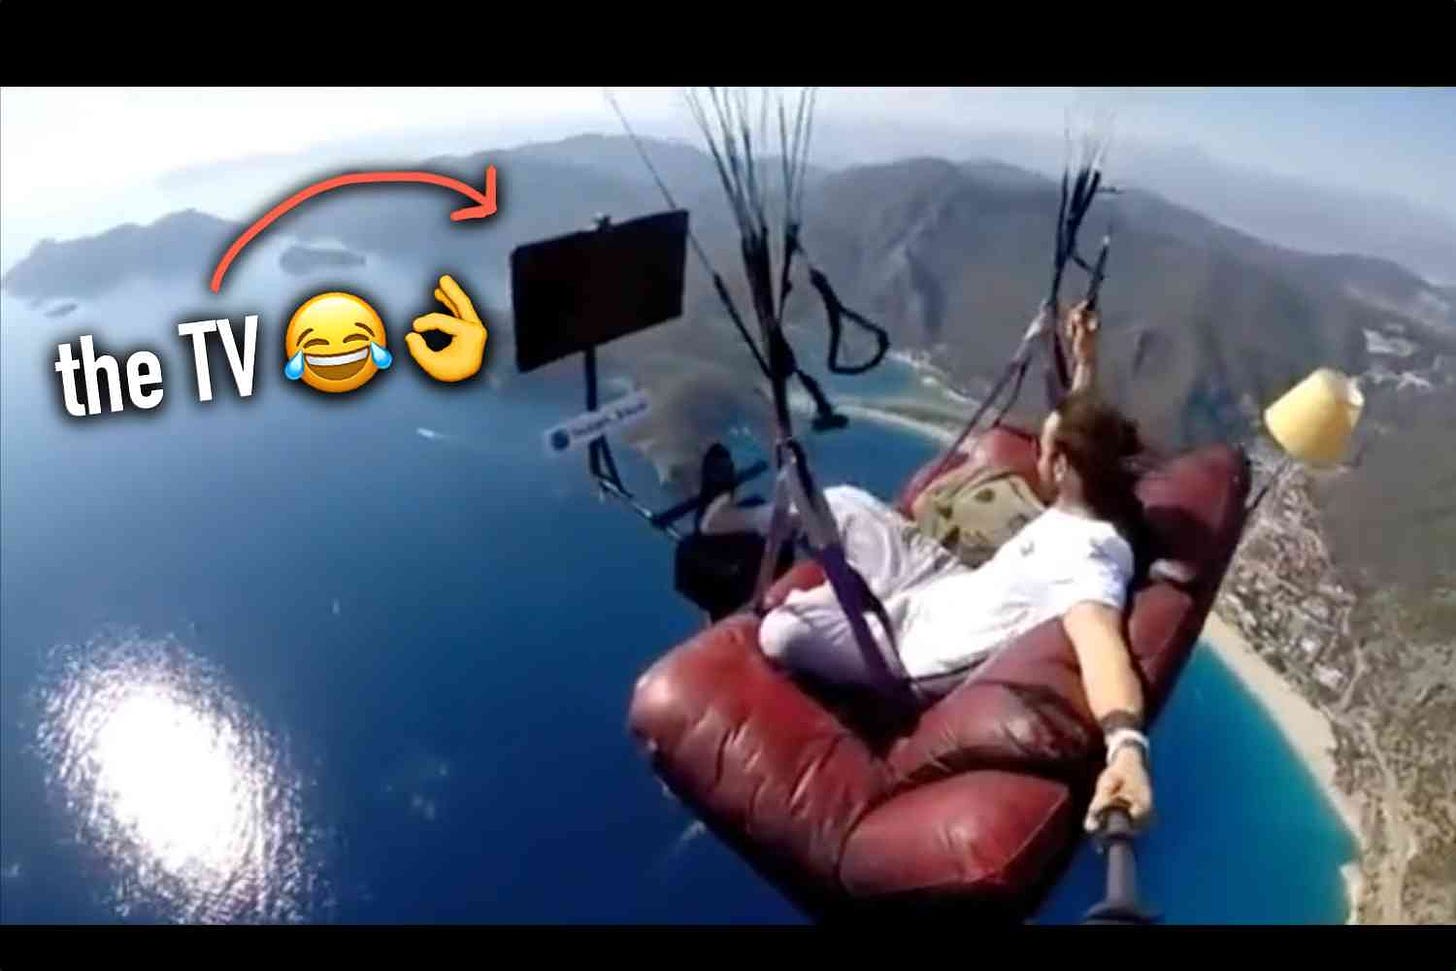 Check out this viral broski living his best couch-potato life among the clouds